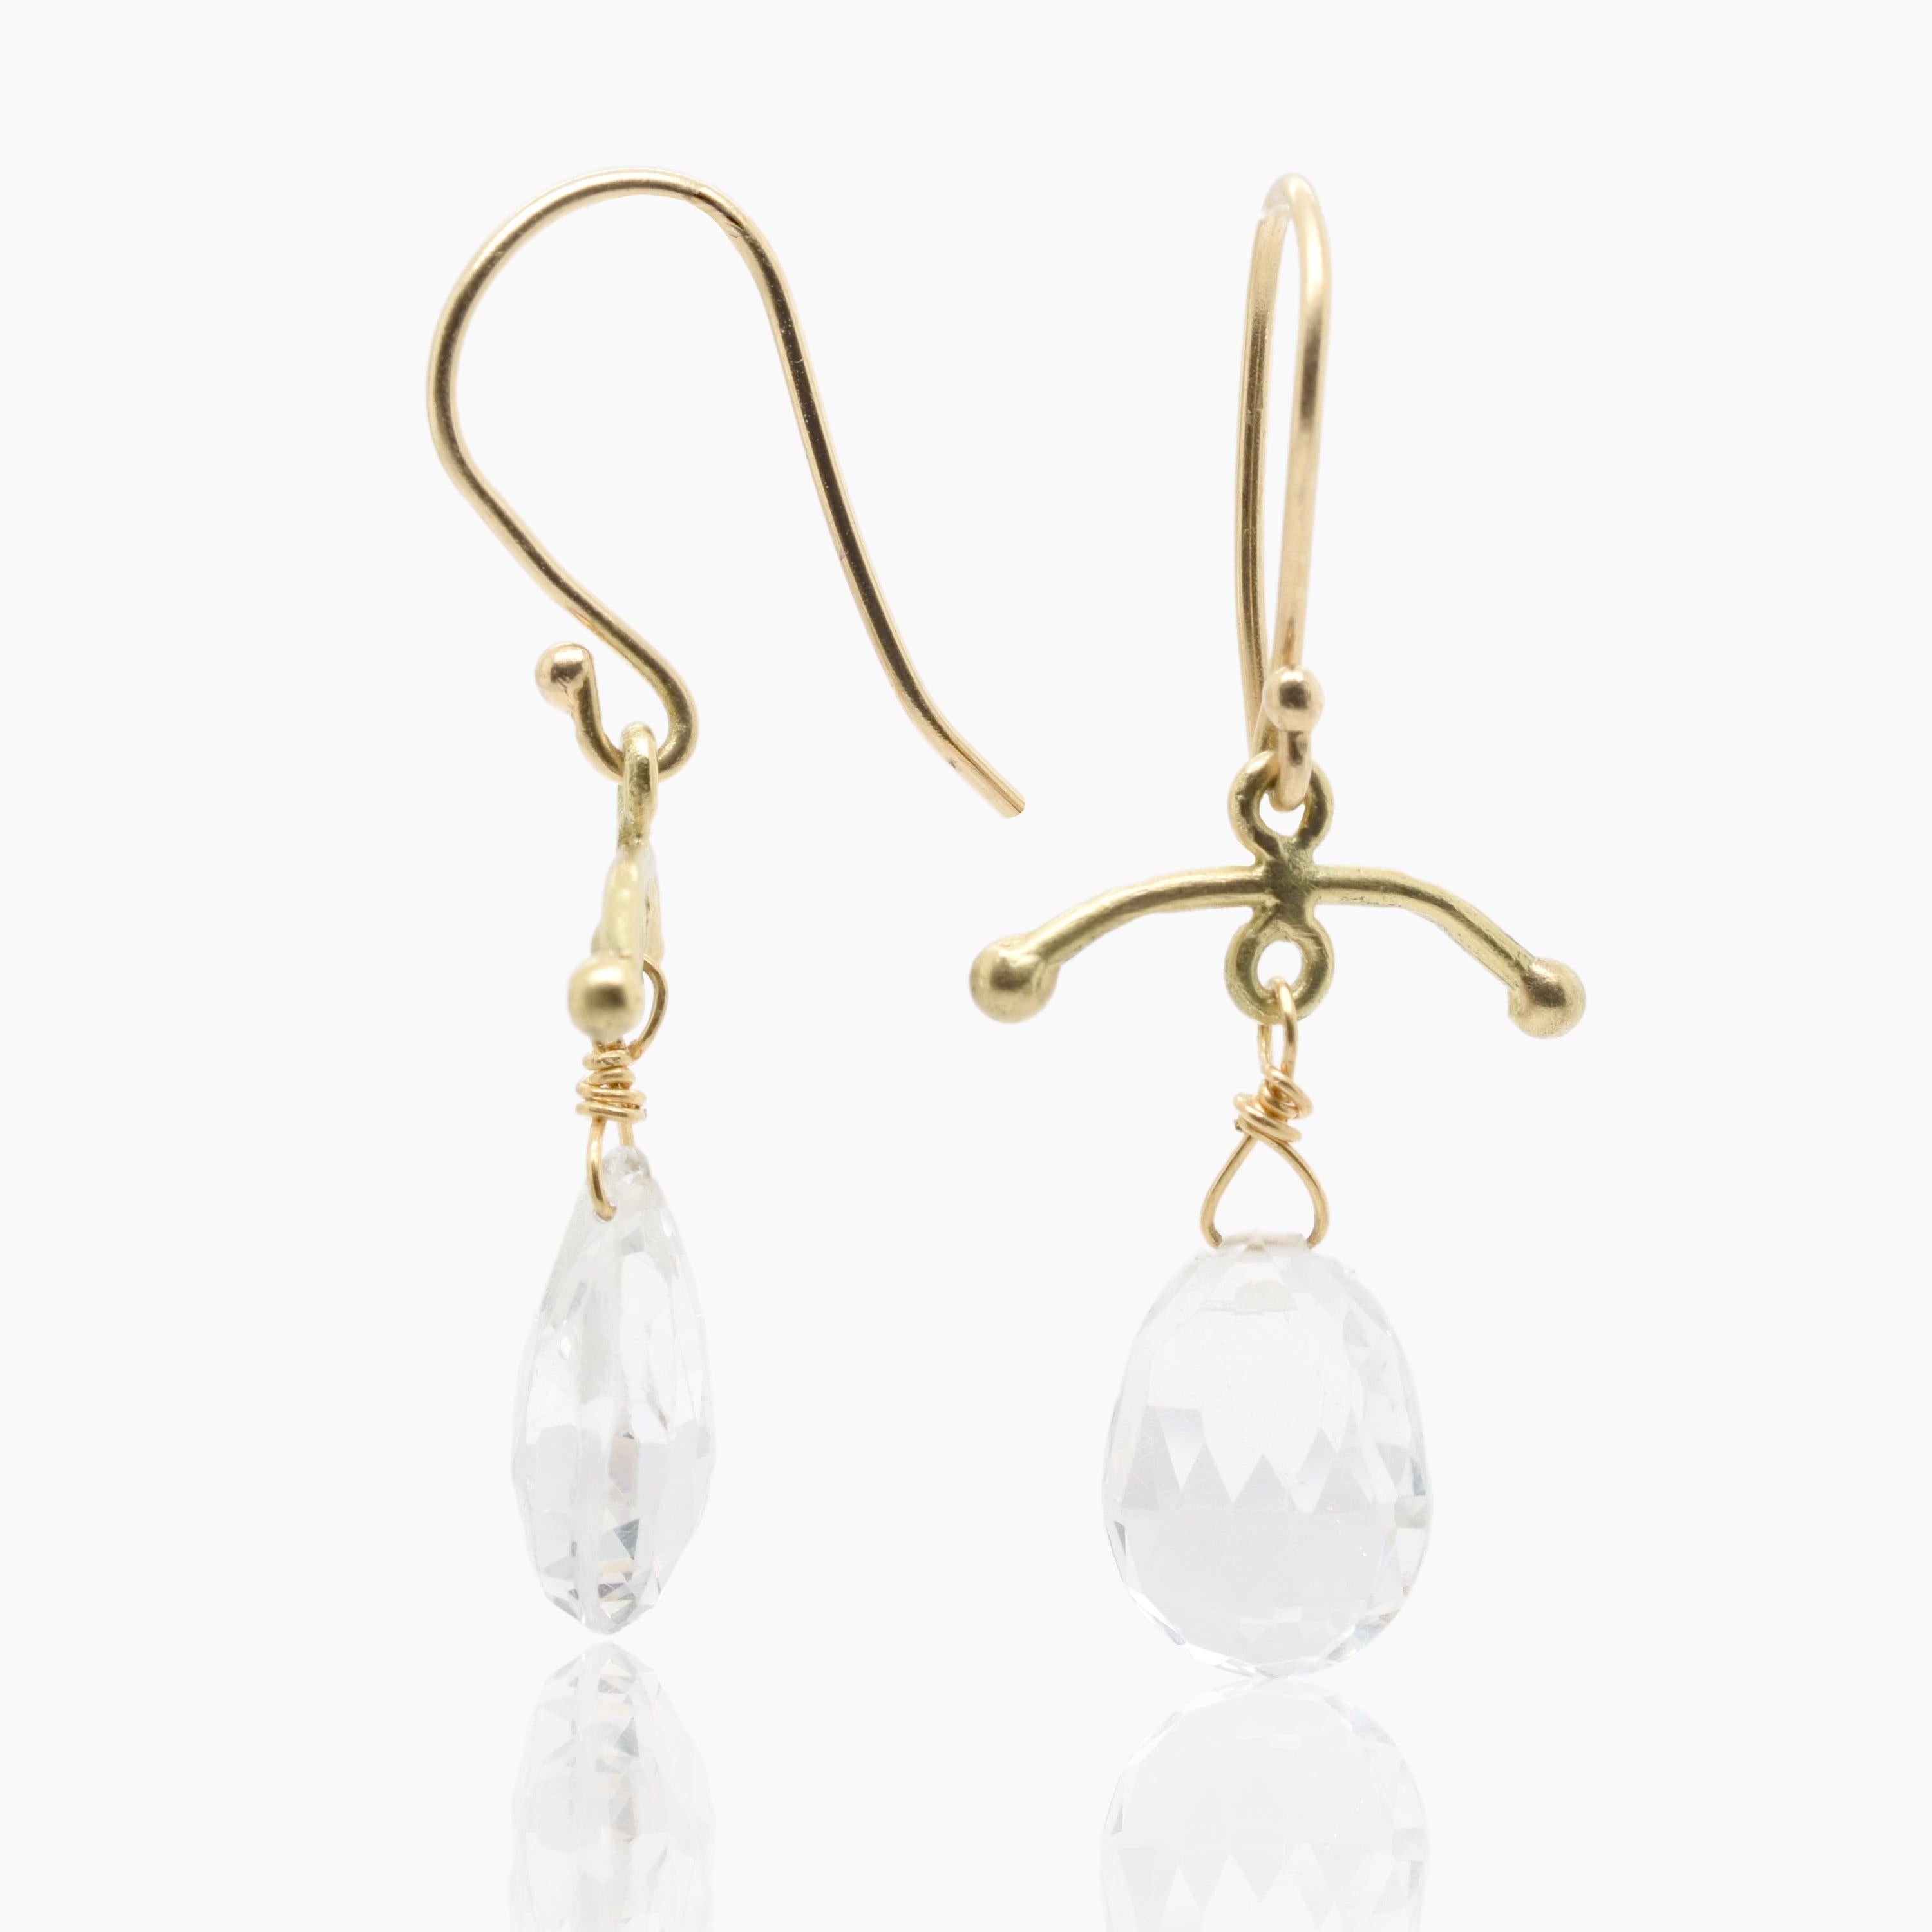 These simple classic earrings are a great everyday pair.  You can dress them up or down.  An 18K gold element, inspired by watch fobs, has a sparkly faceted rock crystal briolette wire wrapped in 22K gold.  The ear wires are 18K gold, stamped and